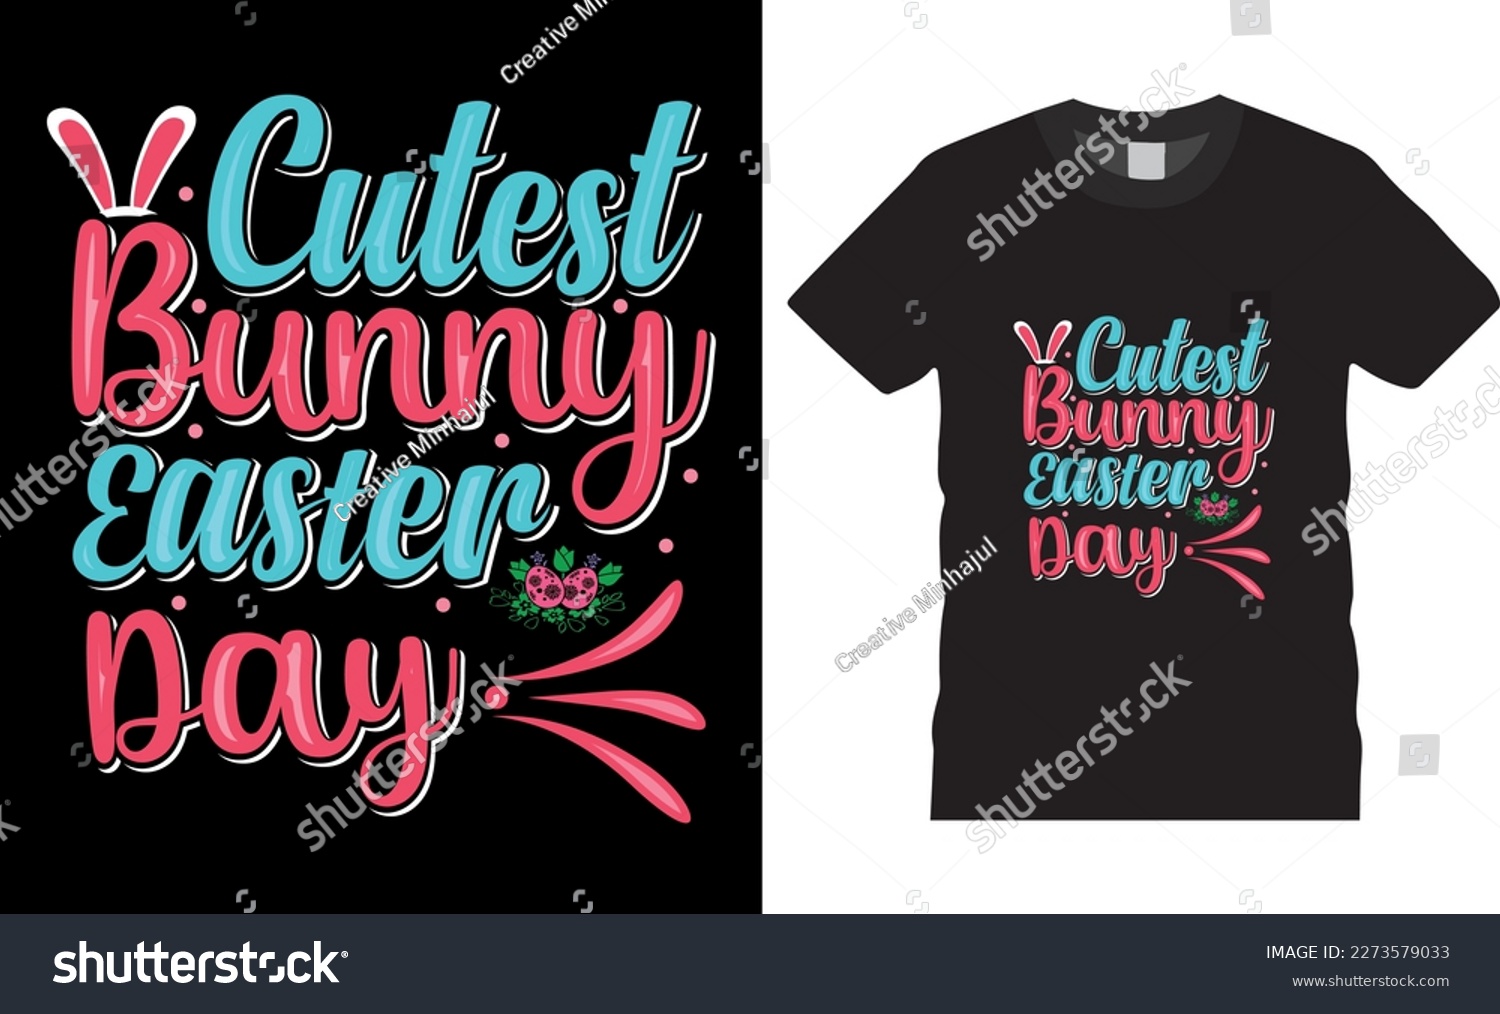 SVG of Happy easter rabbit, bunny tshirt vector design template. Cutest Bunny easter day t-shirt design.Ready to print for apparel, poster, mug and greeting plate illustration. svg